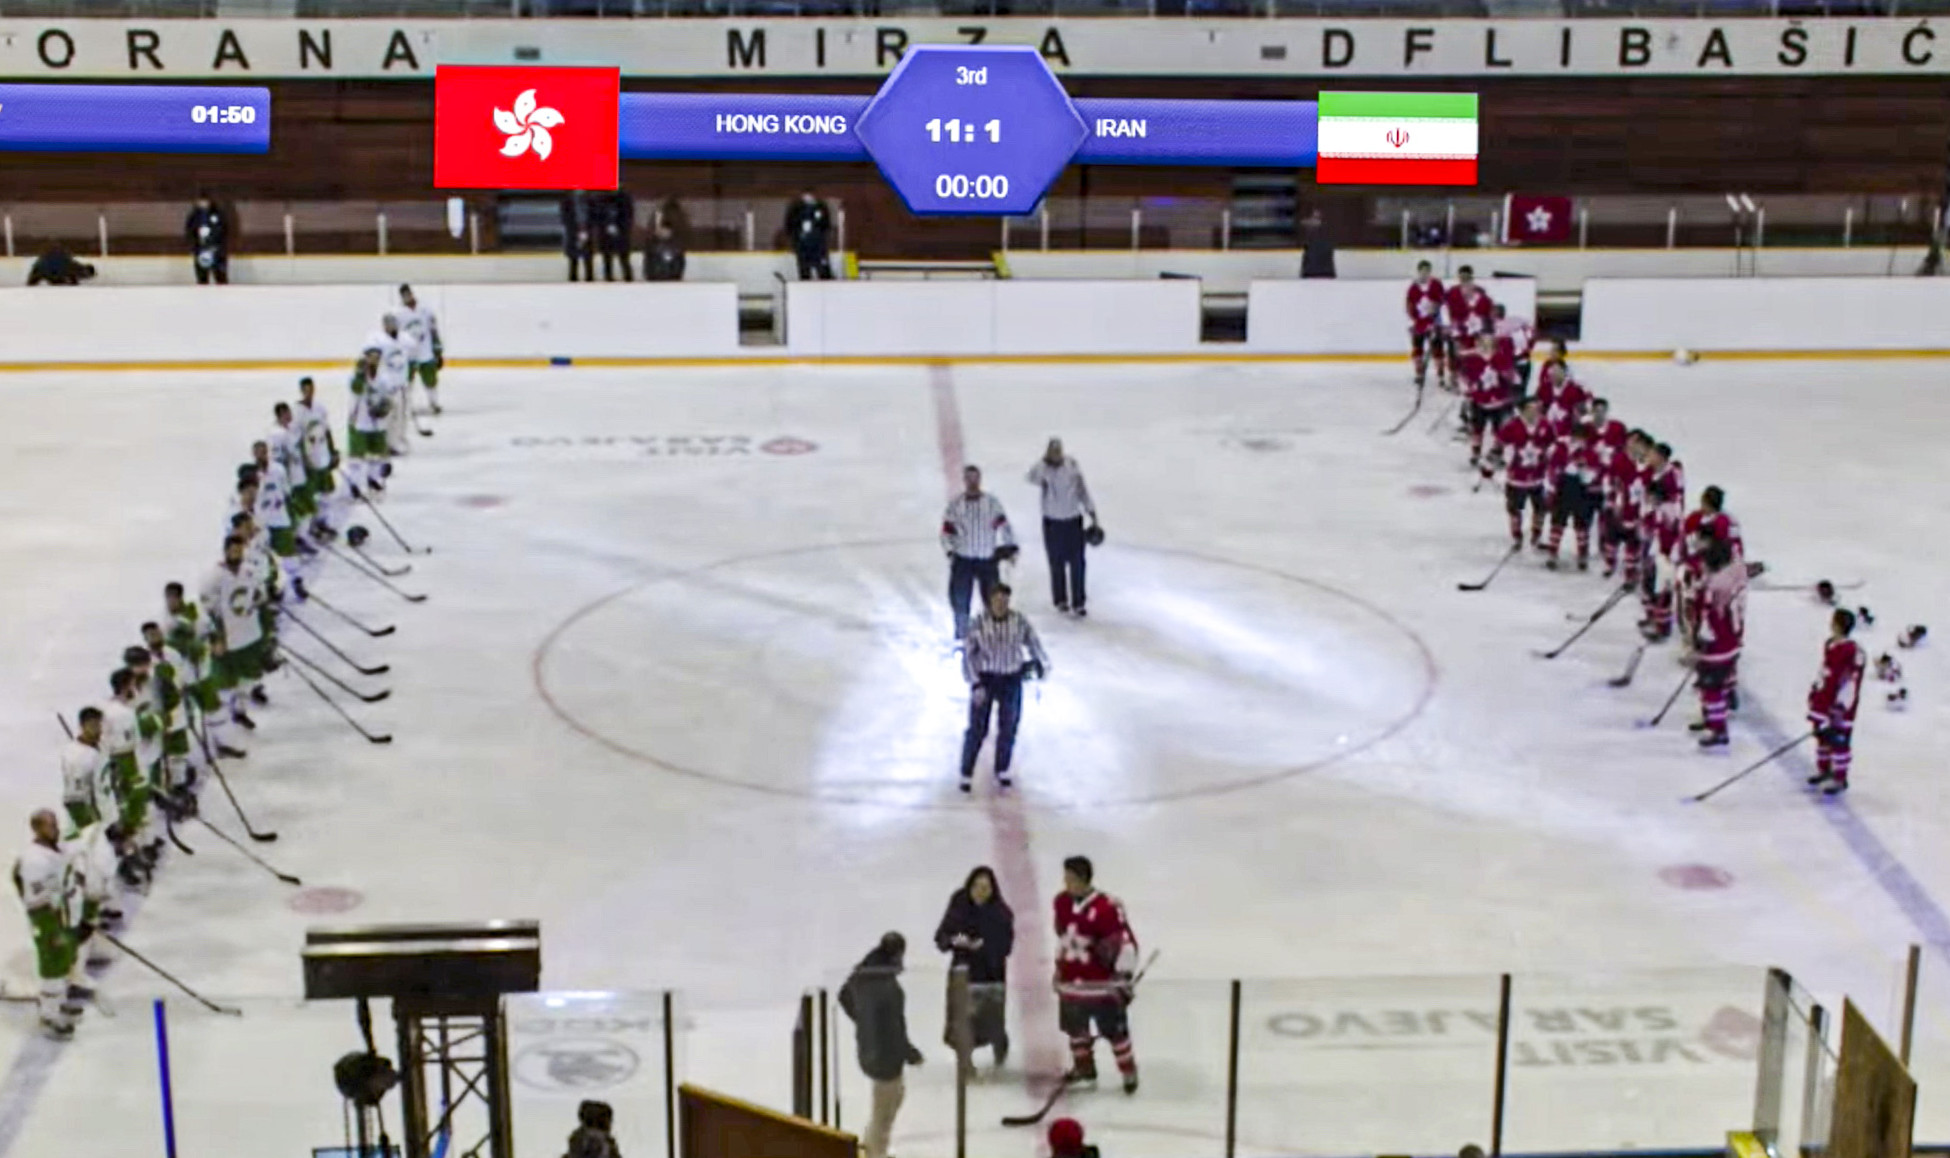 A protest song was played instead of the Chinese national anthem after Hong Kong beat Iran 11-1 at the 2023 Ice Hockey World Championship in Sarajevo, Bosnia and Herzegovina. Photo: Handout